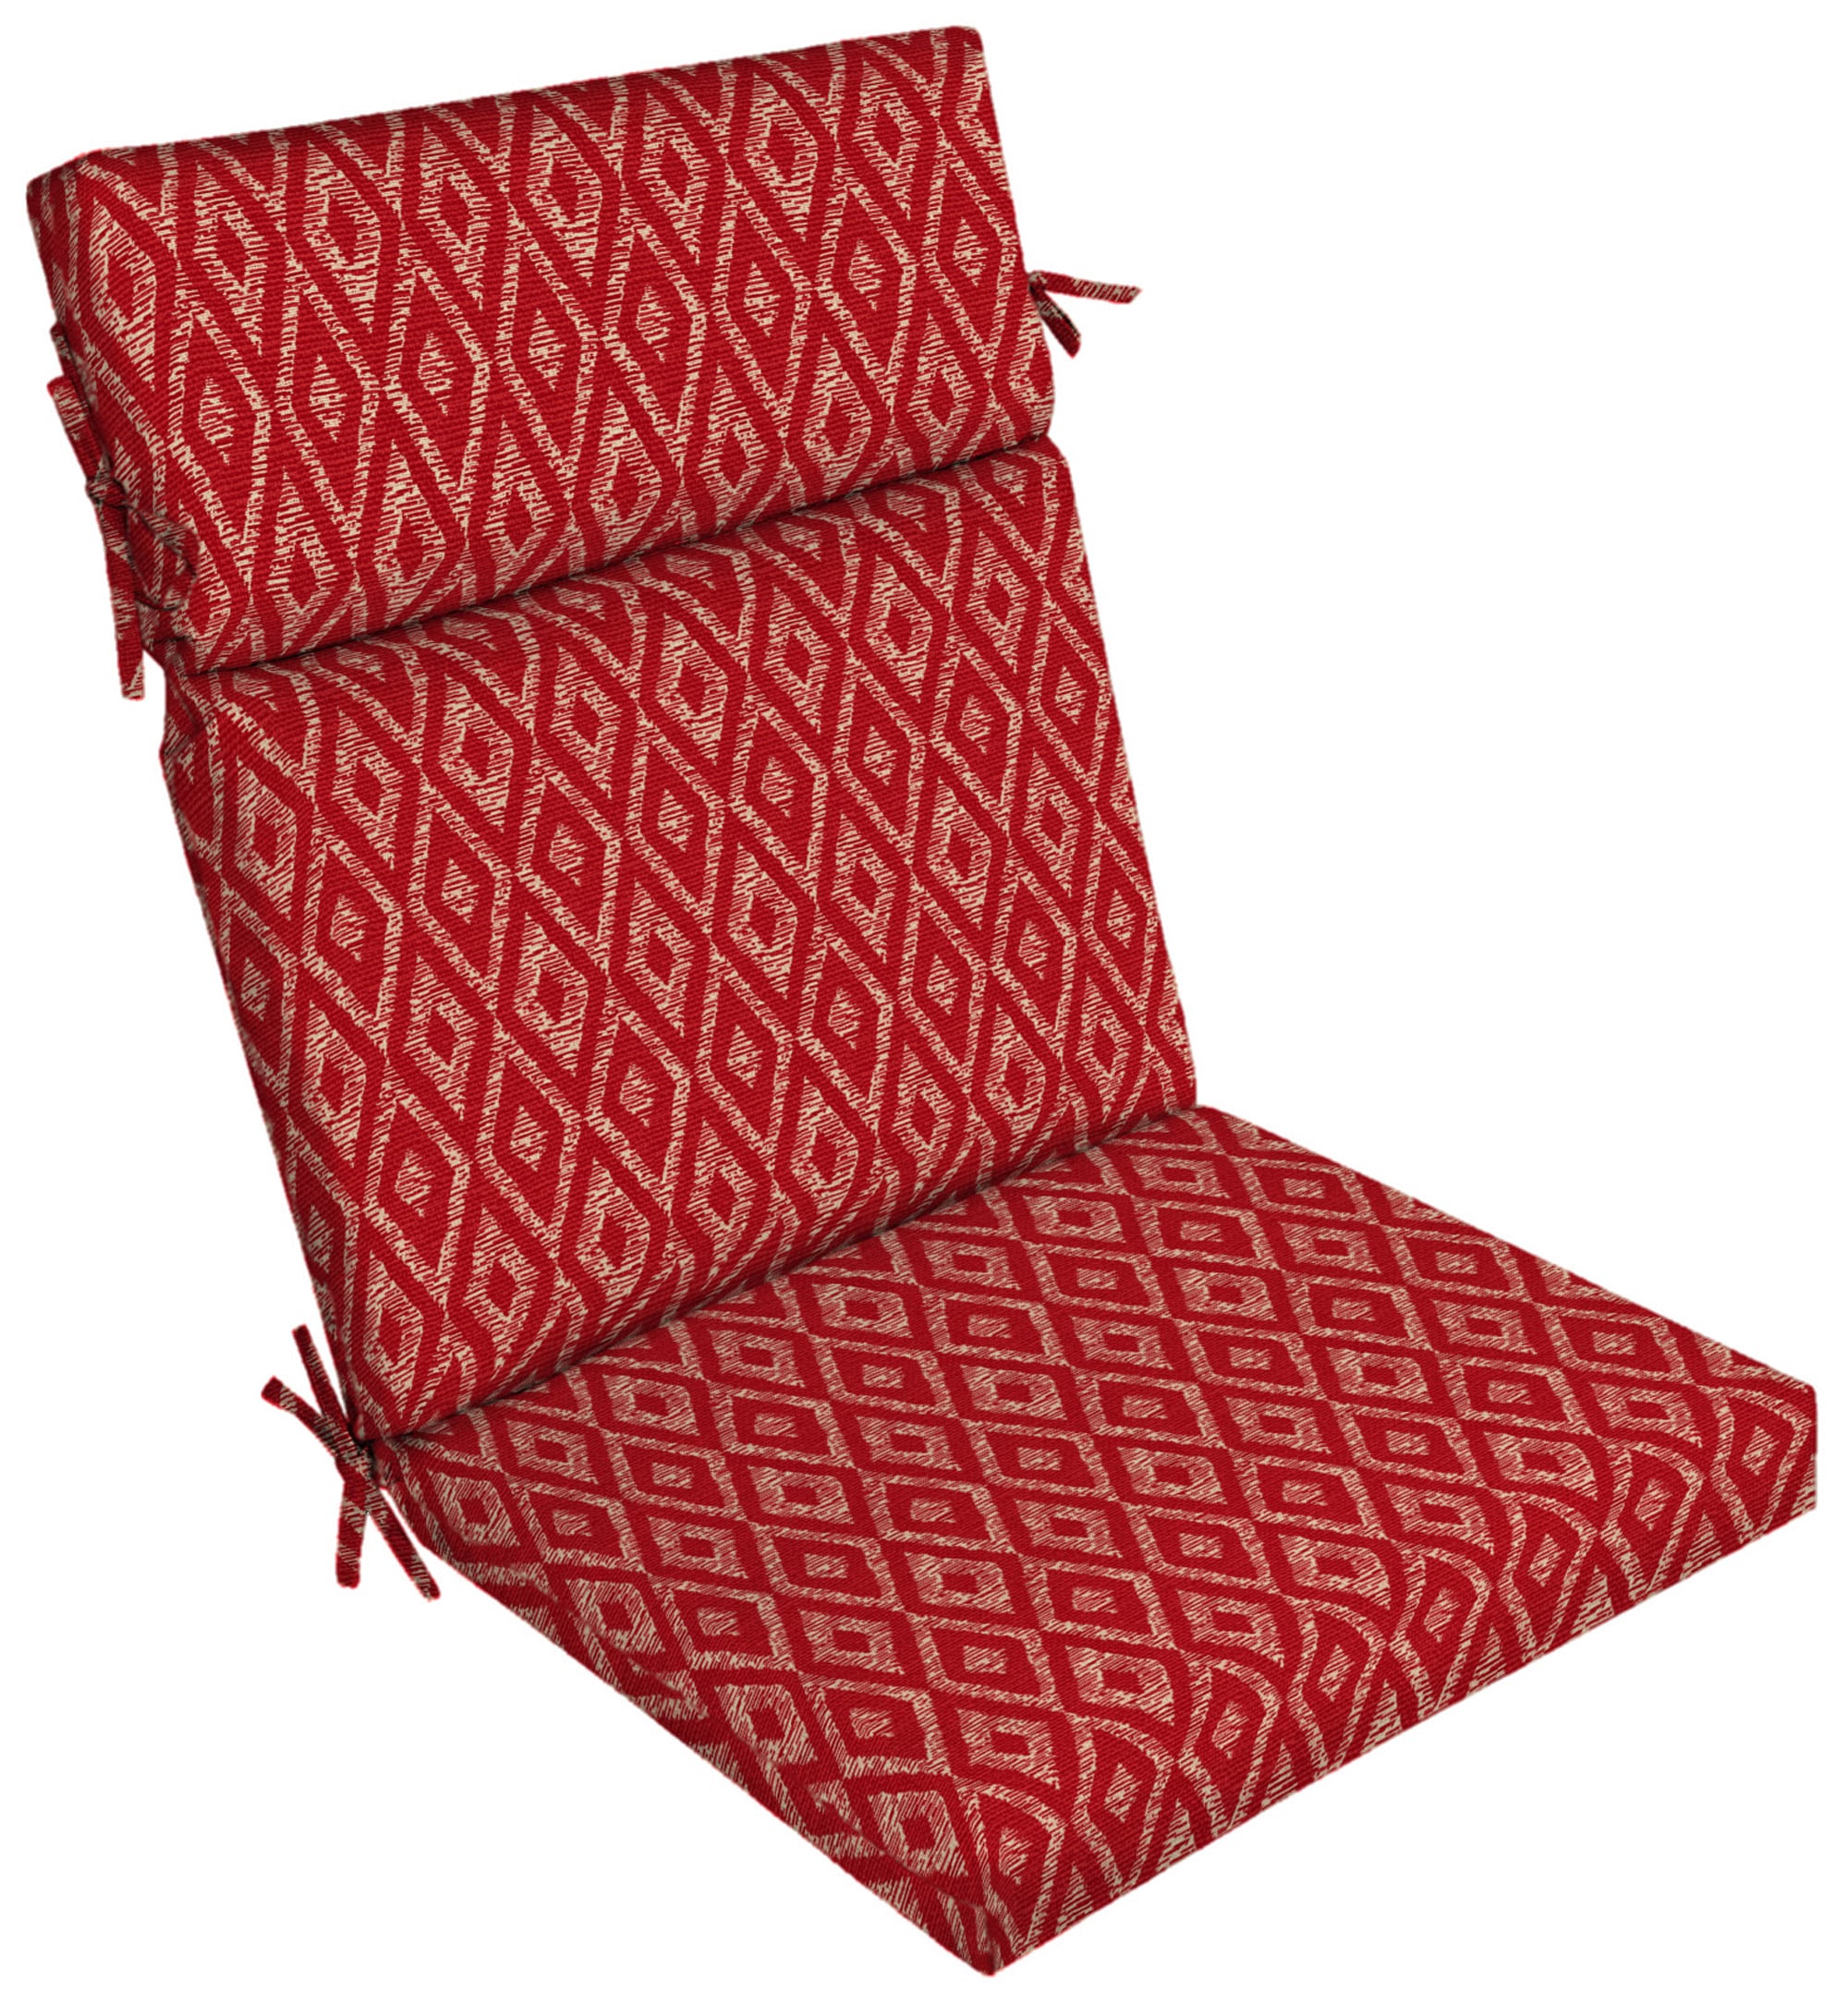 Garden Treasures 20-in x 21-in Red Diam Ruby High Back Patio Chair ...